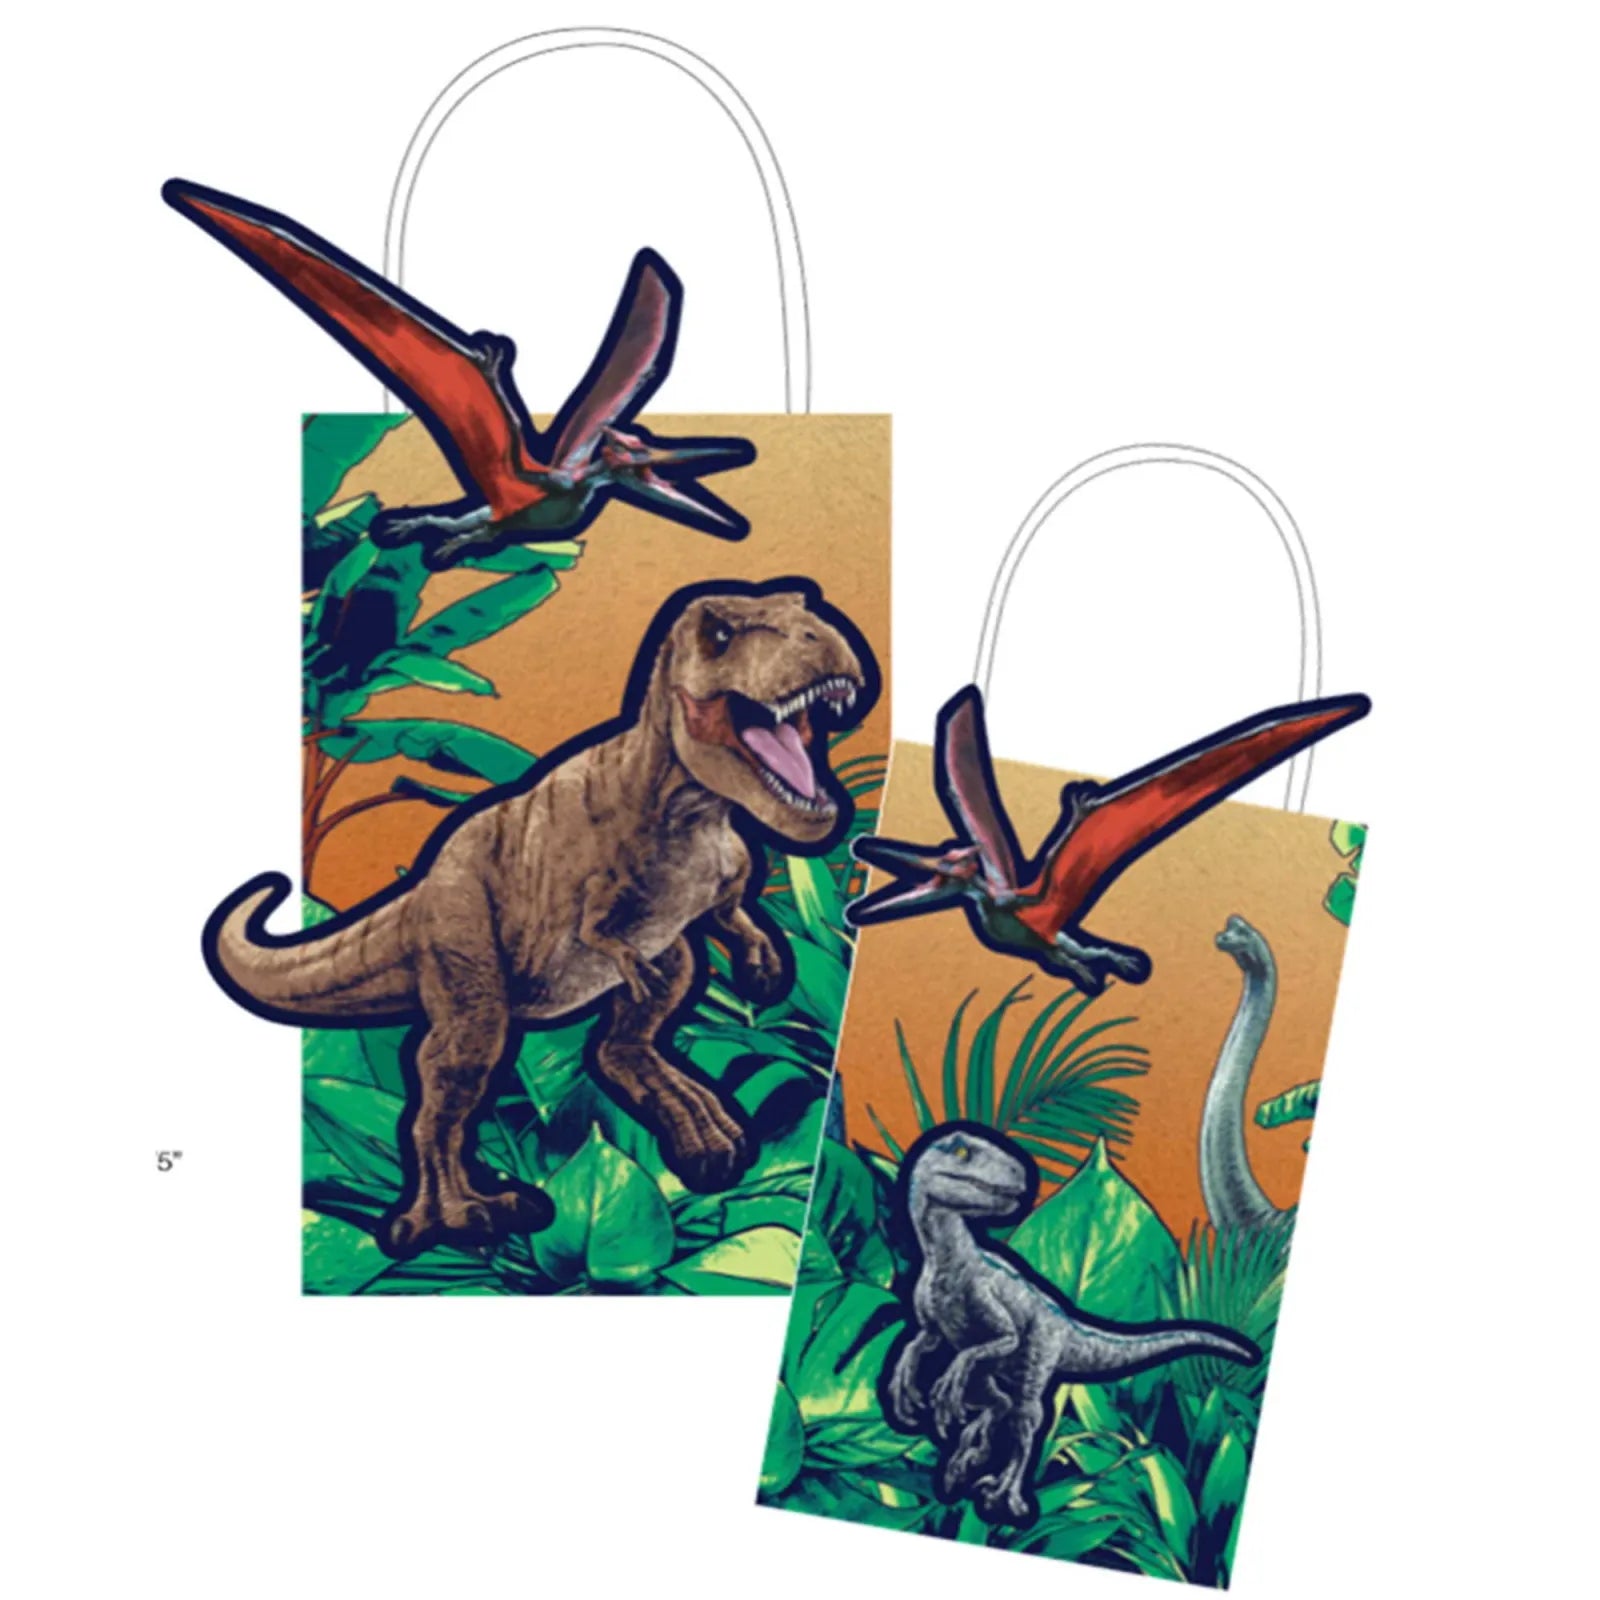 JURASSIC INTO THE WILD CREATE YOUR OWN PAPER GIFT BAGS (PACK OF 8)